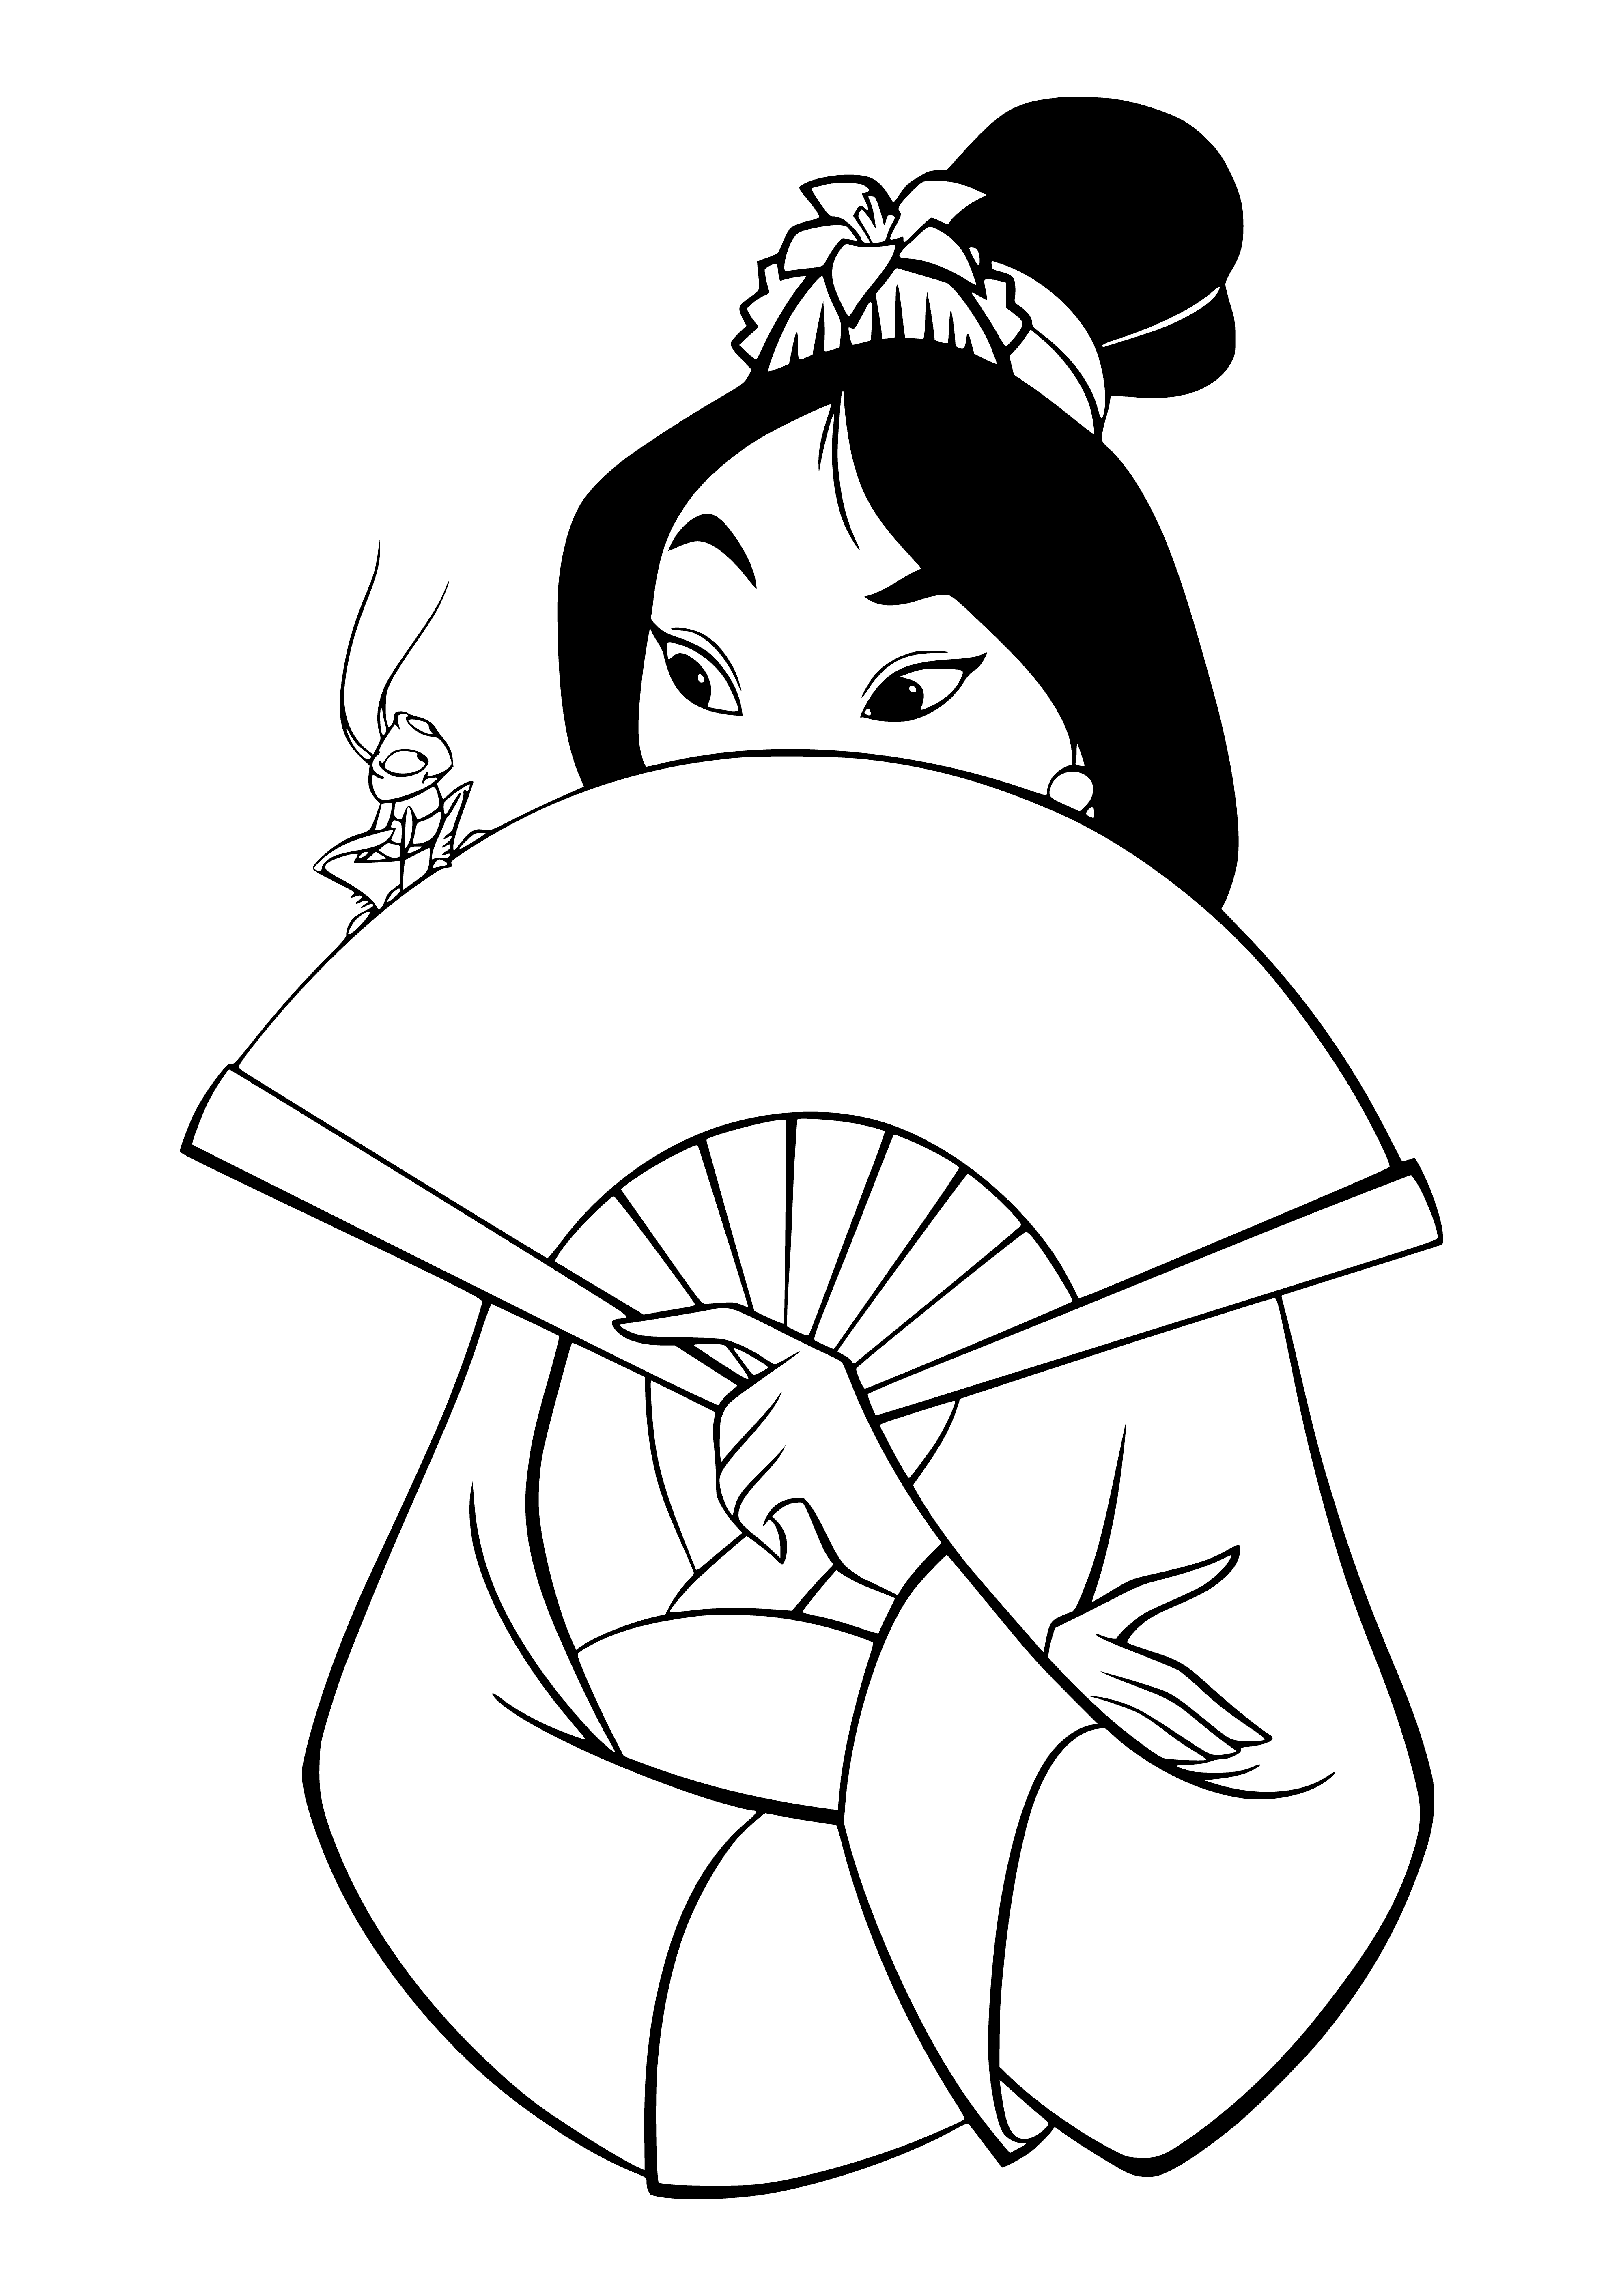 coloring page: Mulan smiles at Kri-Ki, a frog in her hands, both sharing a happy moment.